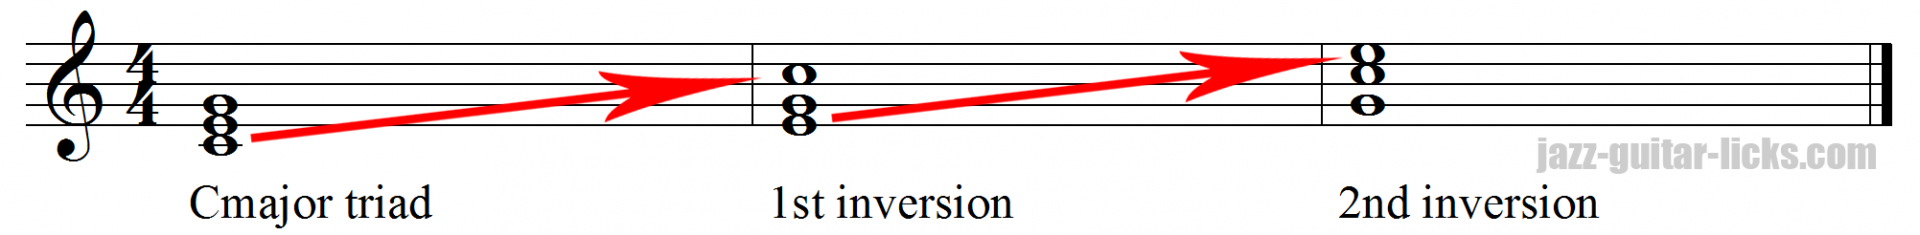 Major triad and inversions